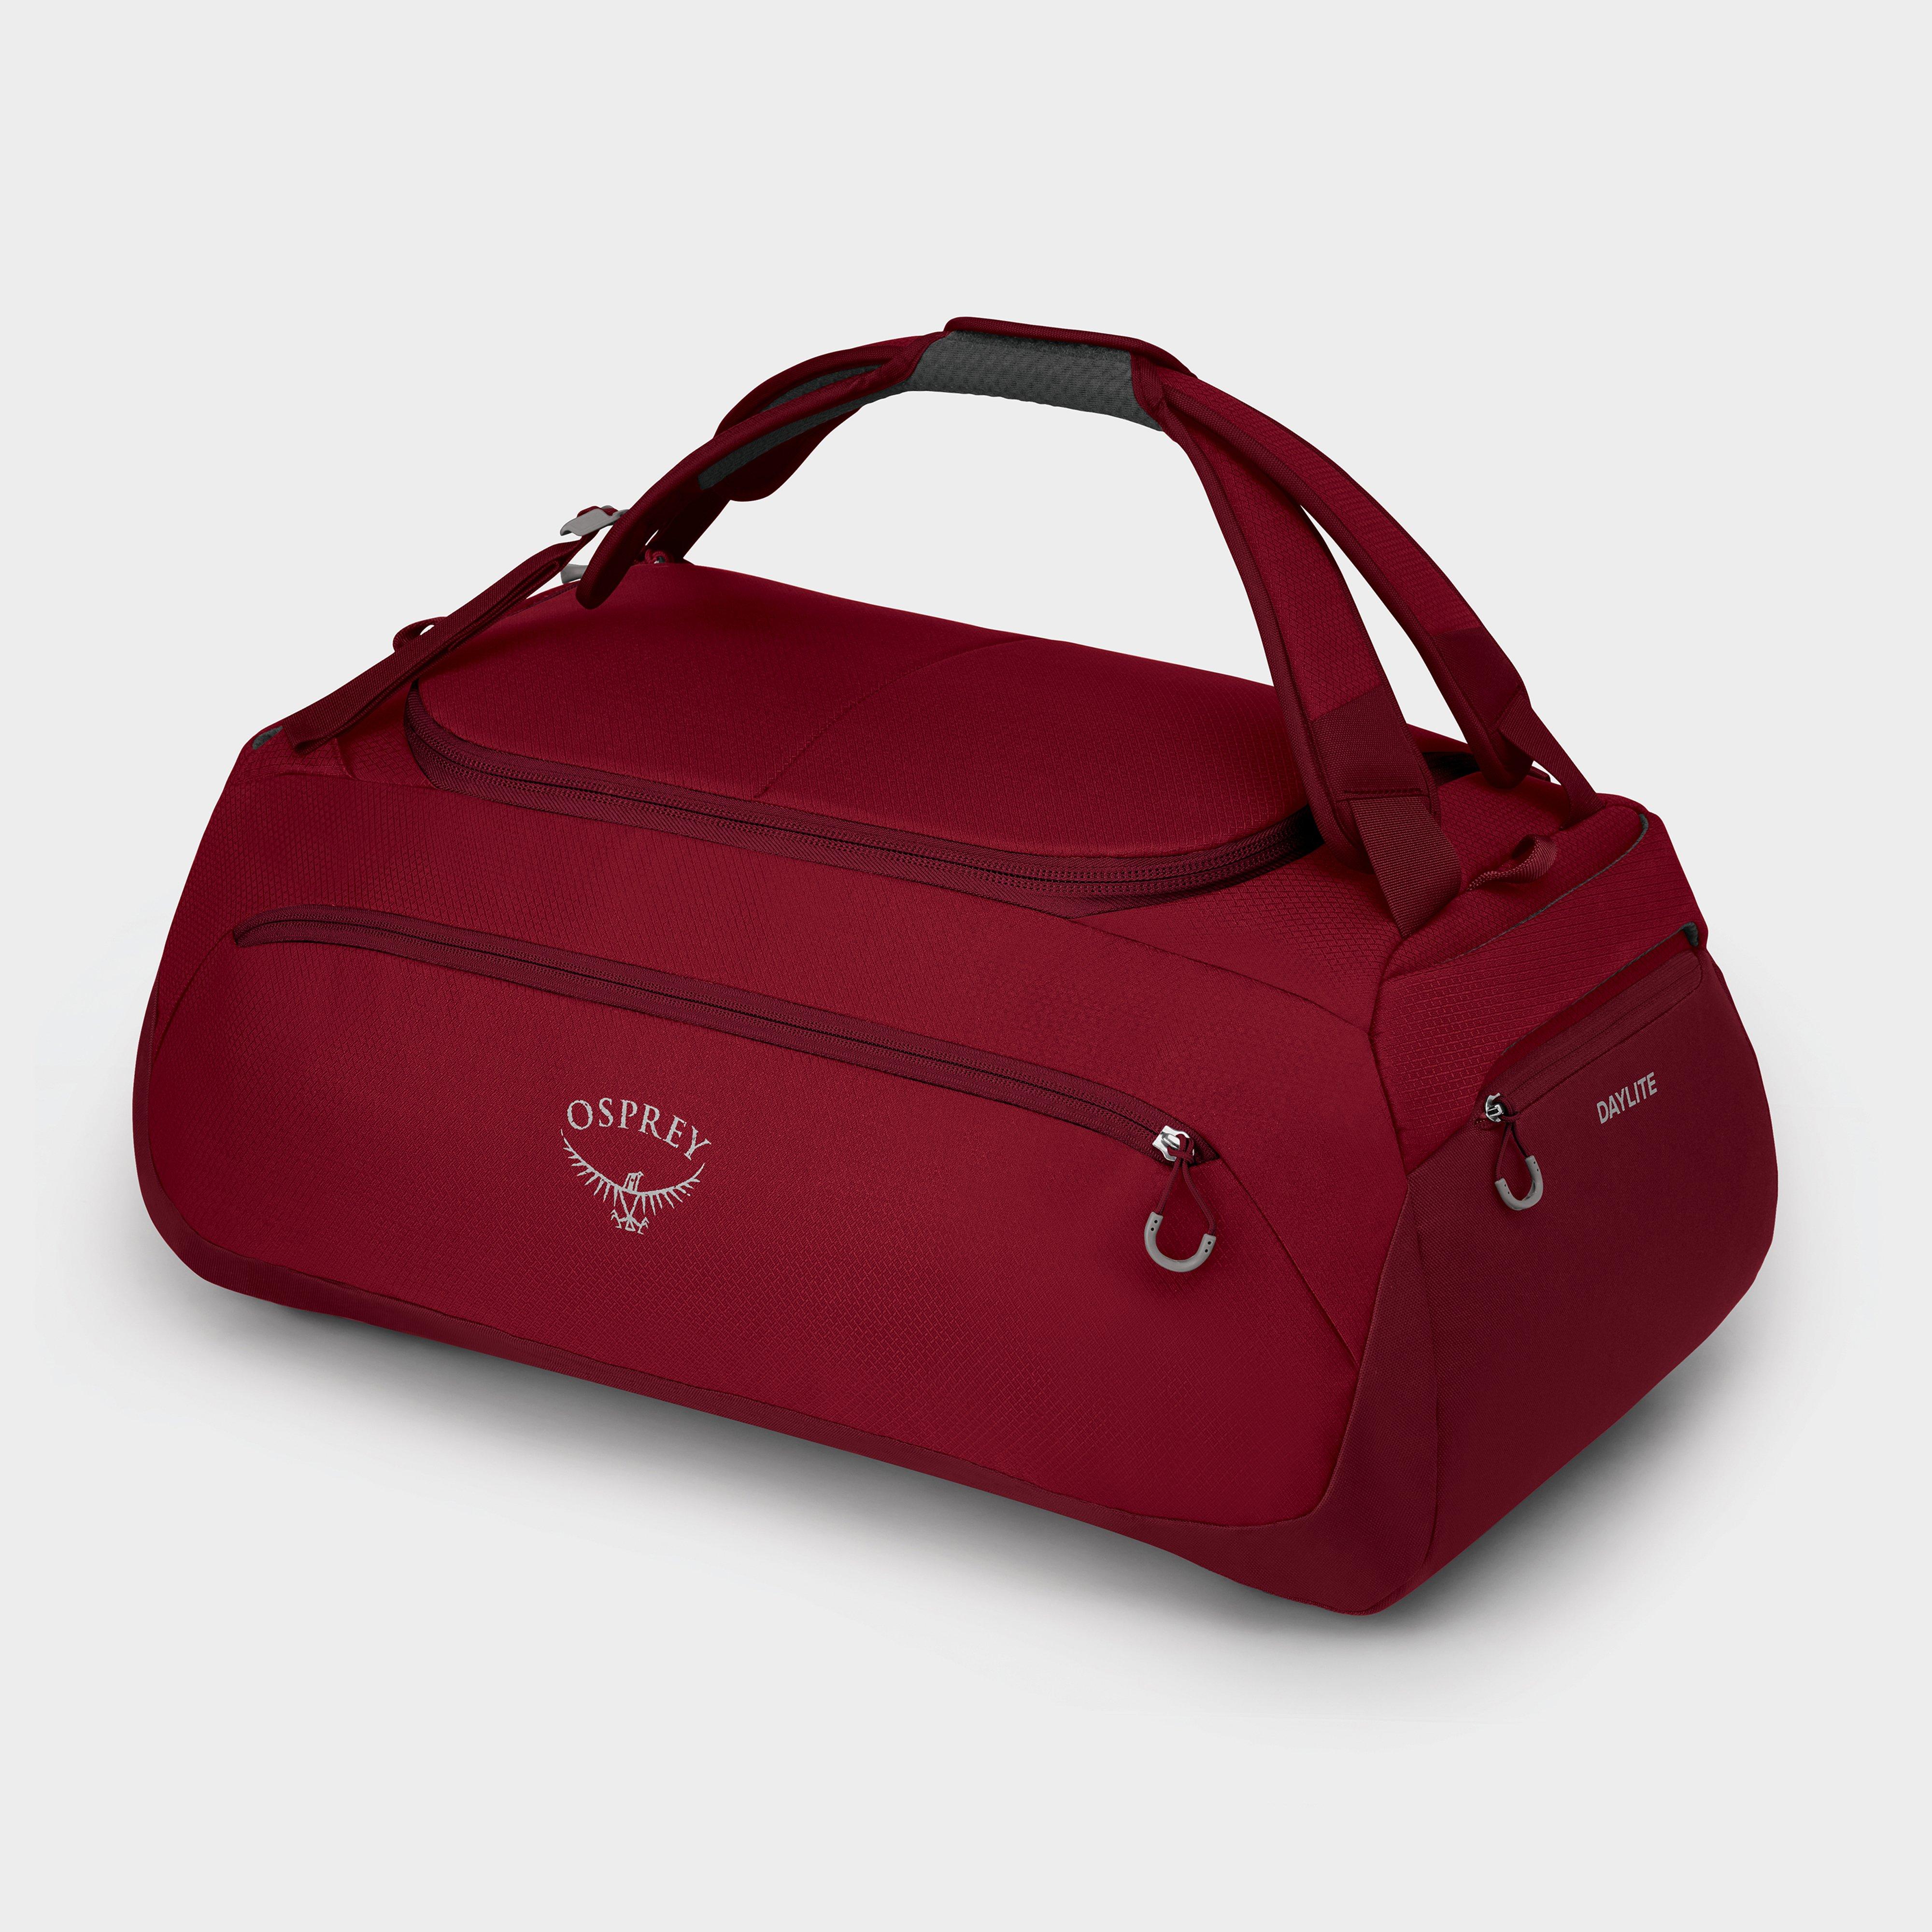 Image of Osprey Daylite Duffel 60 - Red/Red, Red/Red